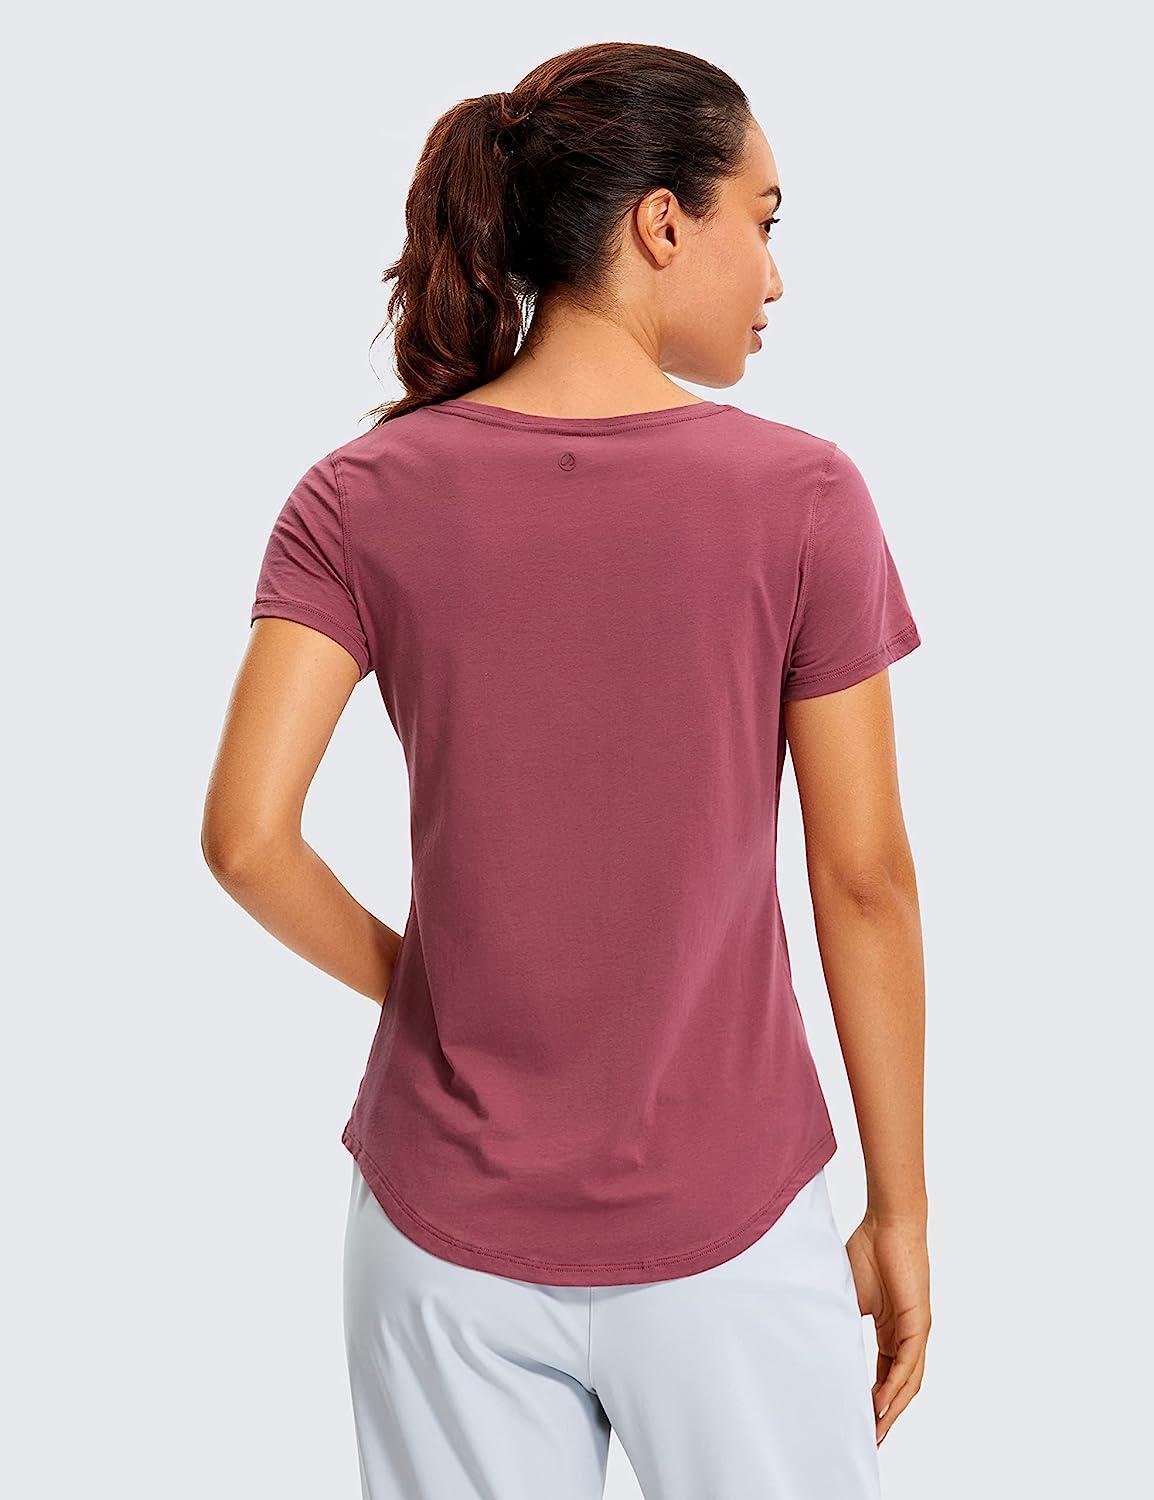 CRZ YOGA Women's Pima Cotton Workout Short Sleeve Shirts Loose Crop Tops  Athletic Gym Shirt Casual Cropped T-Shirt Bright Verdancy Small in Kuwait